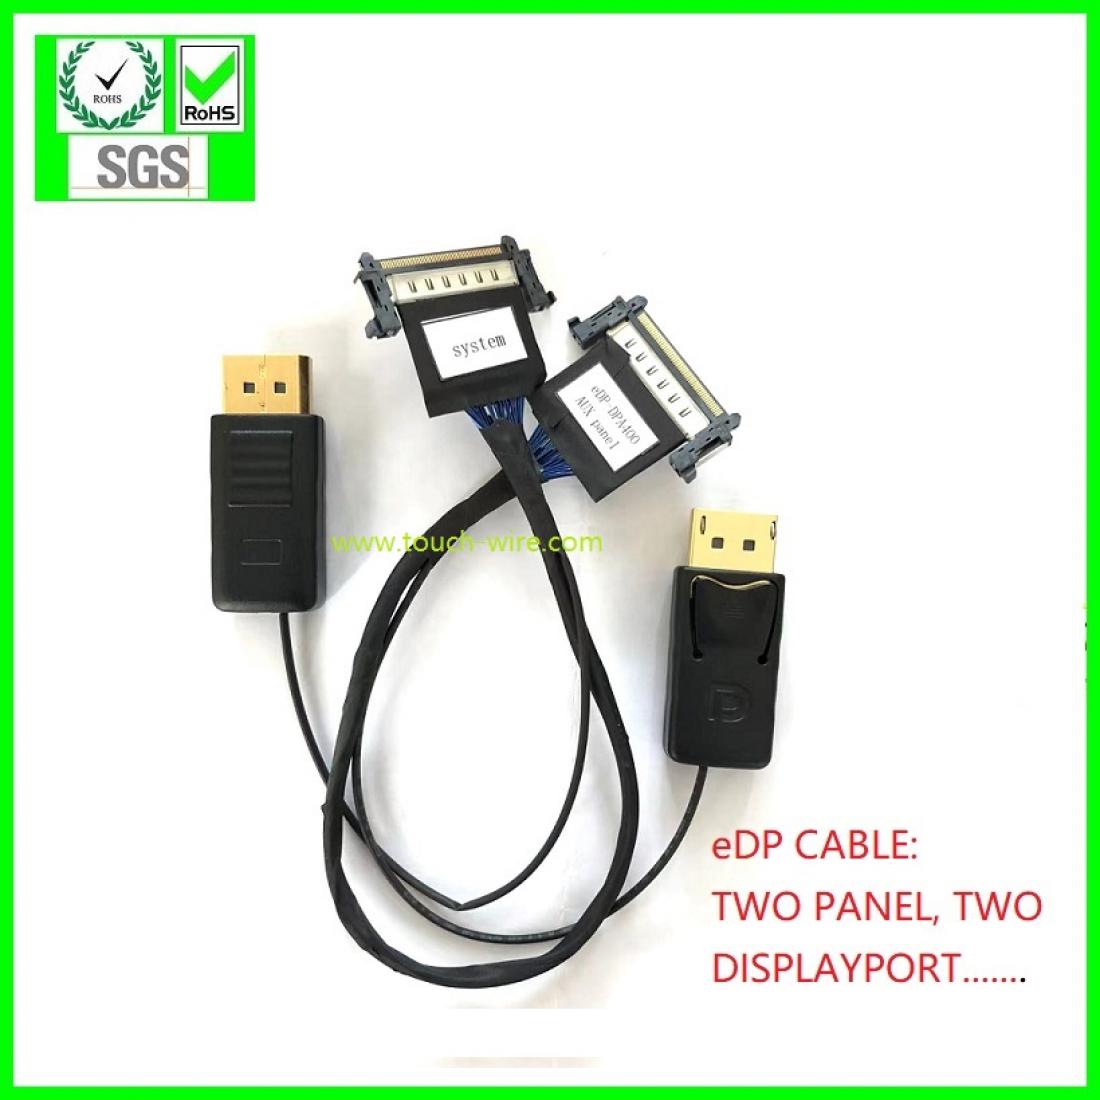 eDP CABLE, JAE FI-RE51CL to 2 side Displayport male ,UL10005 micro coaxial cable